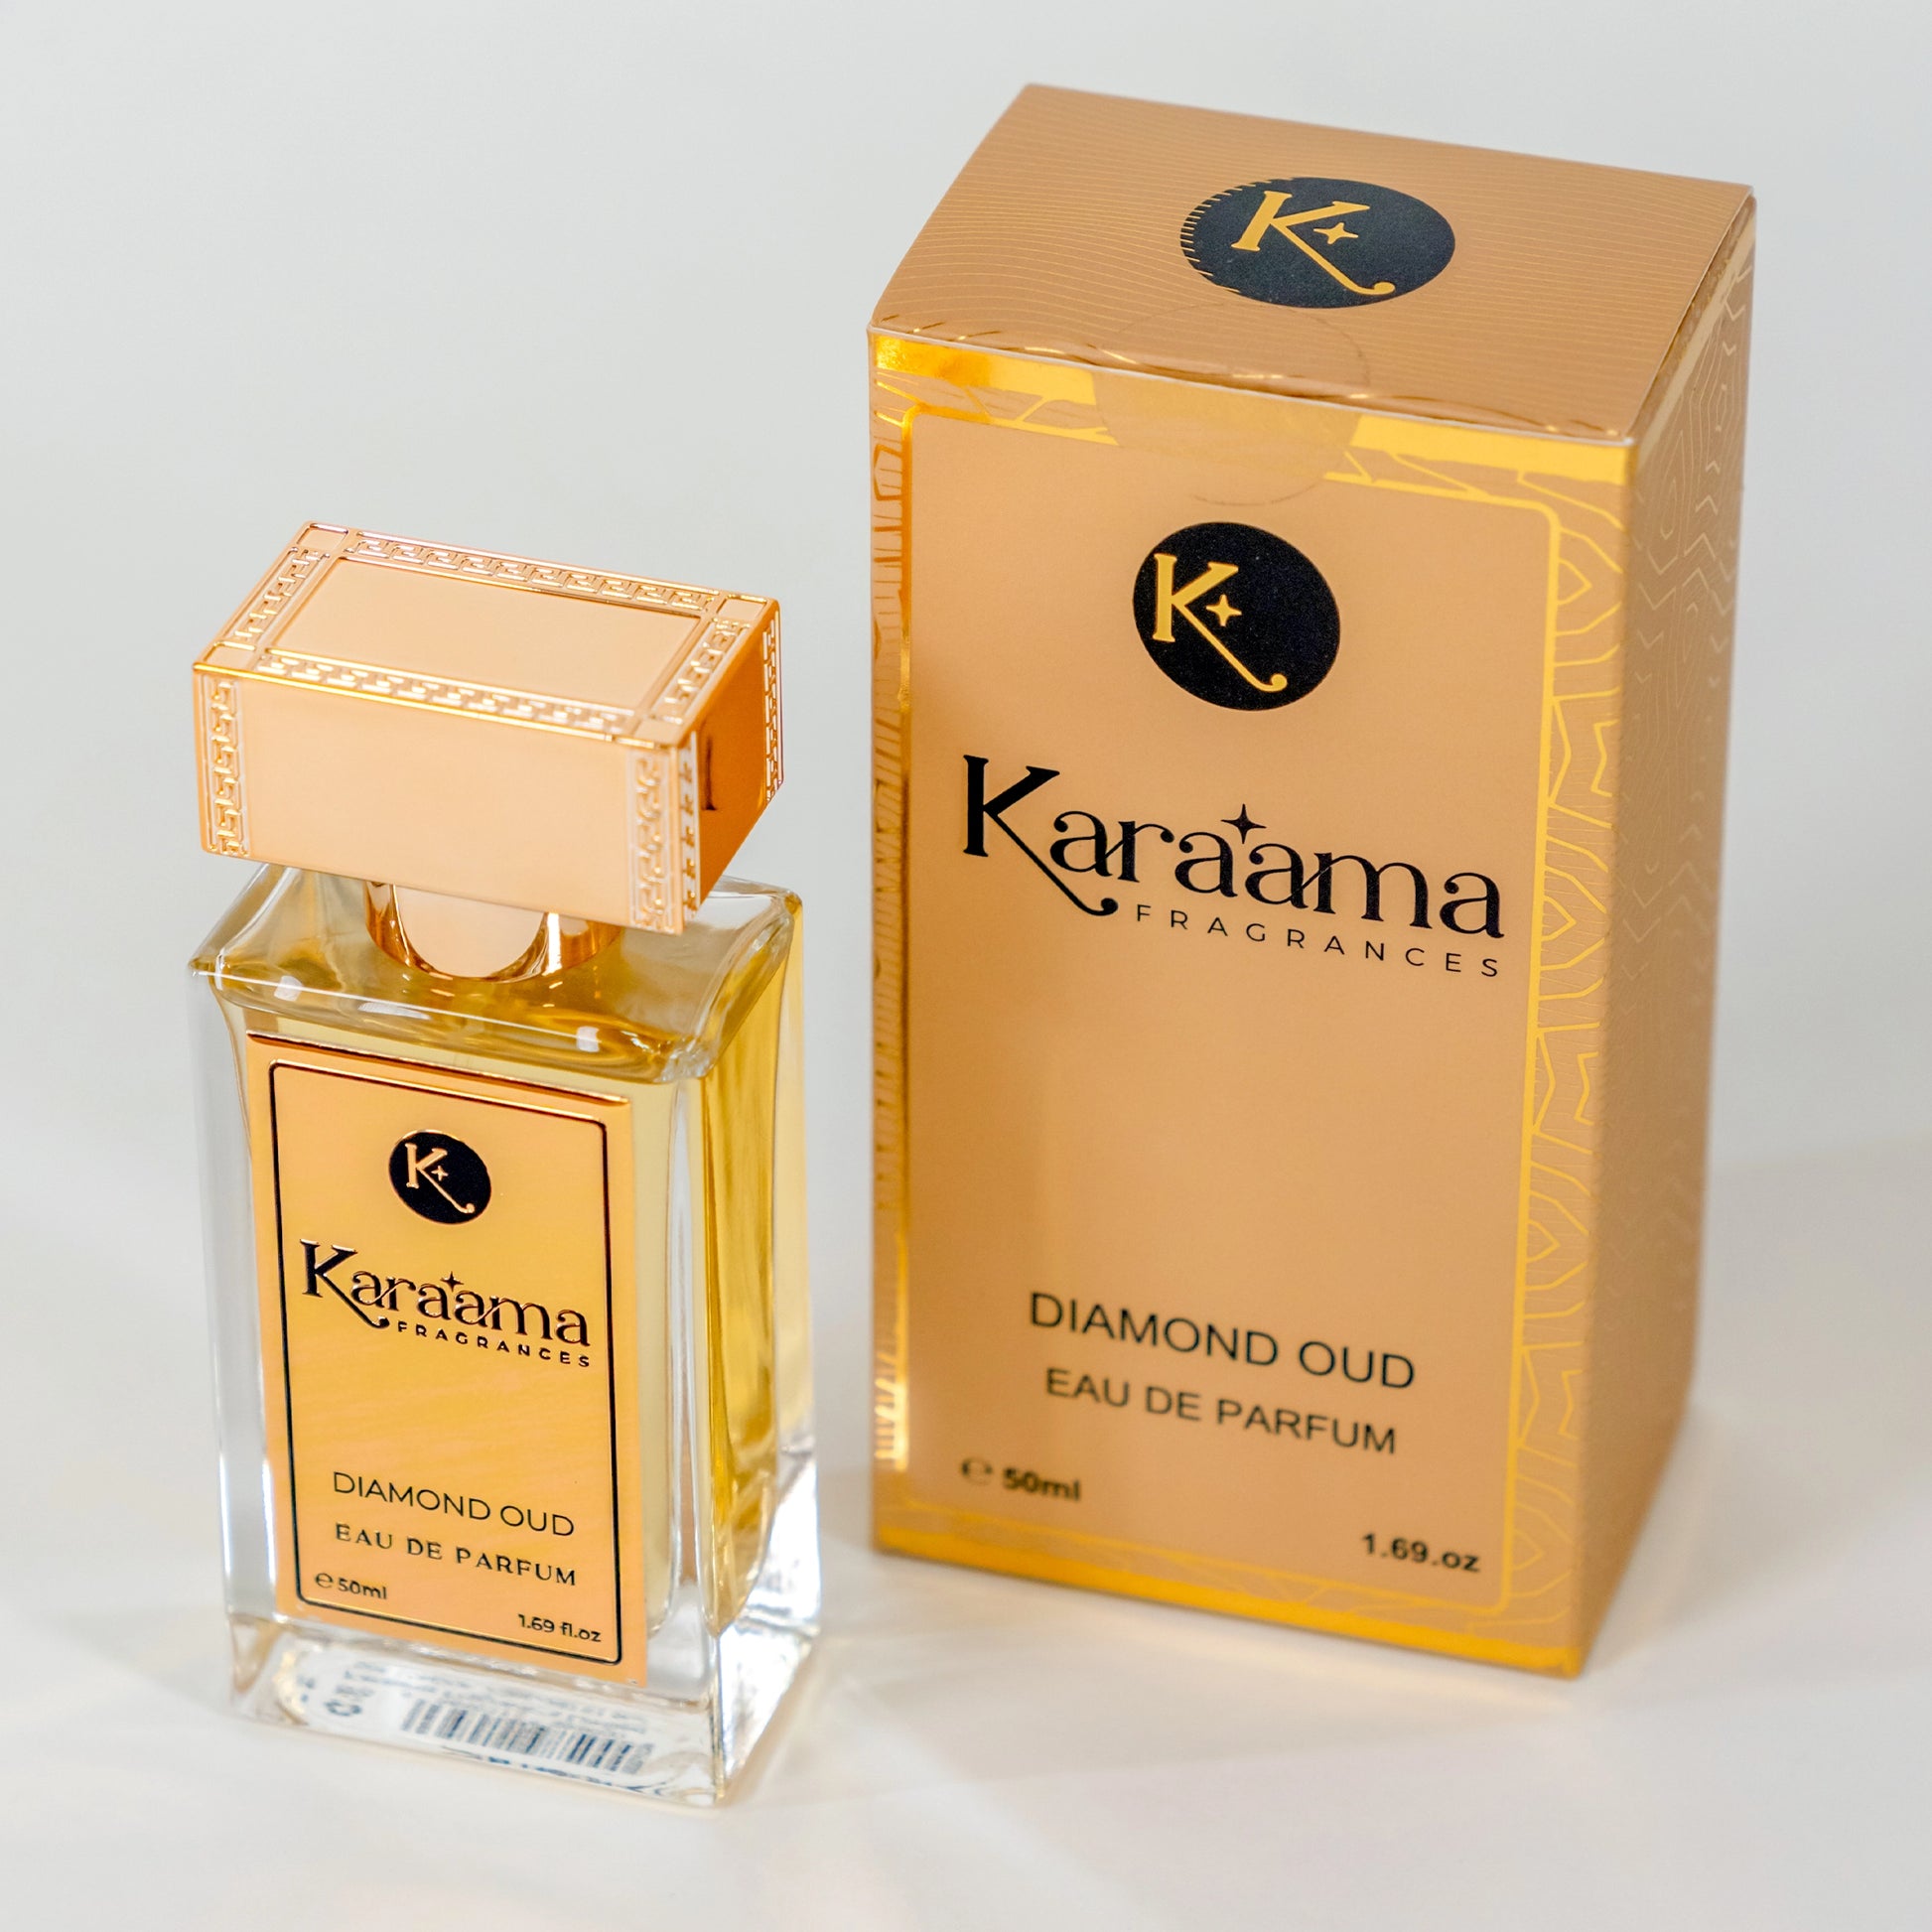 Discover the luxury of Diamond Oud Eau de Parfum by Karaama Fragrances. A trending scent encased in an elegant gold design with intricate details, perfect for those seeking refined, popular fragrances. Shop the latest in opulent perfumery.